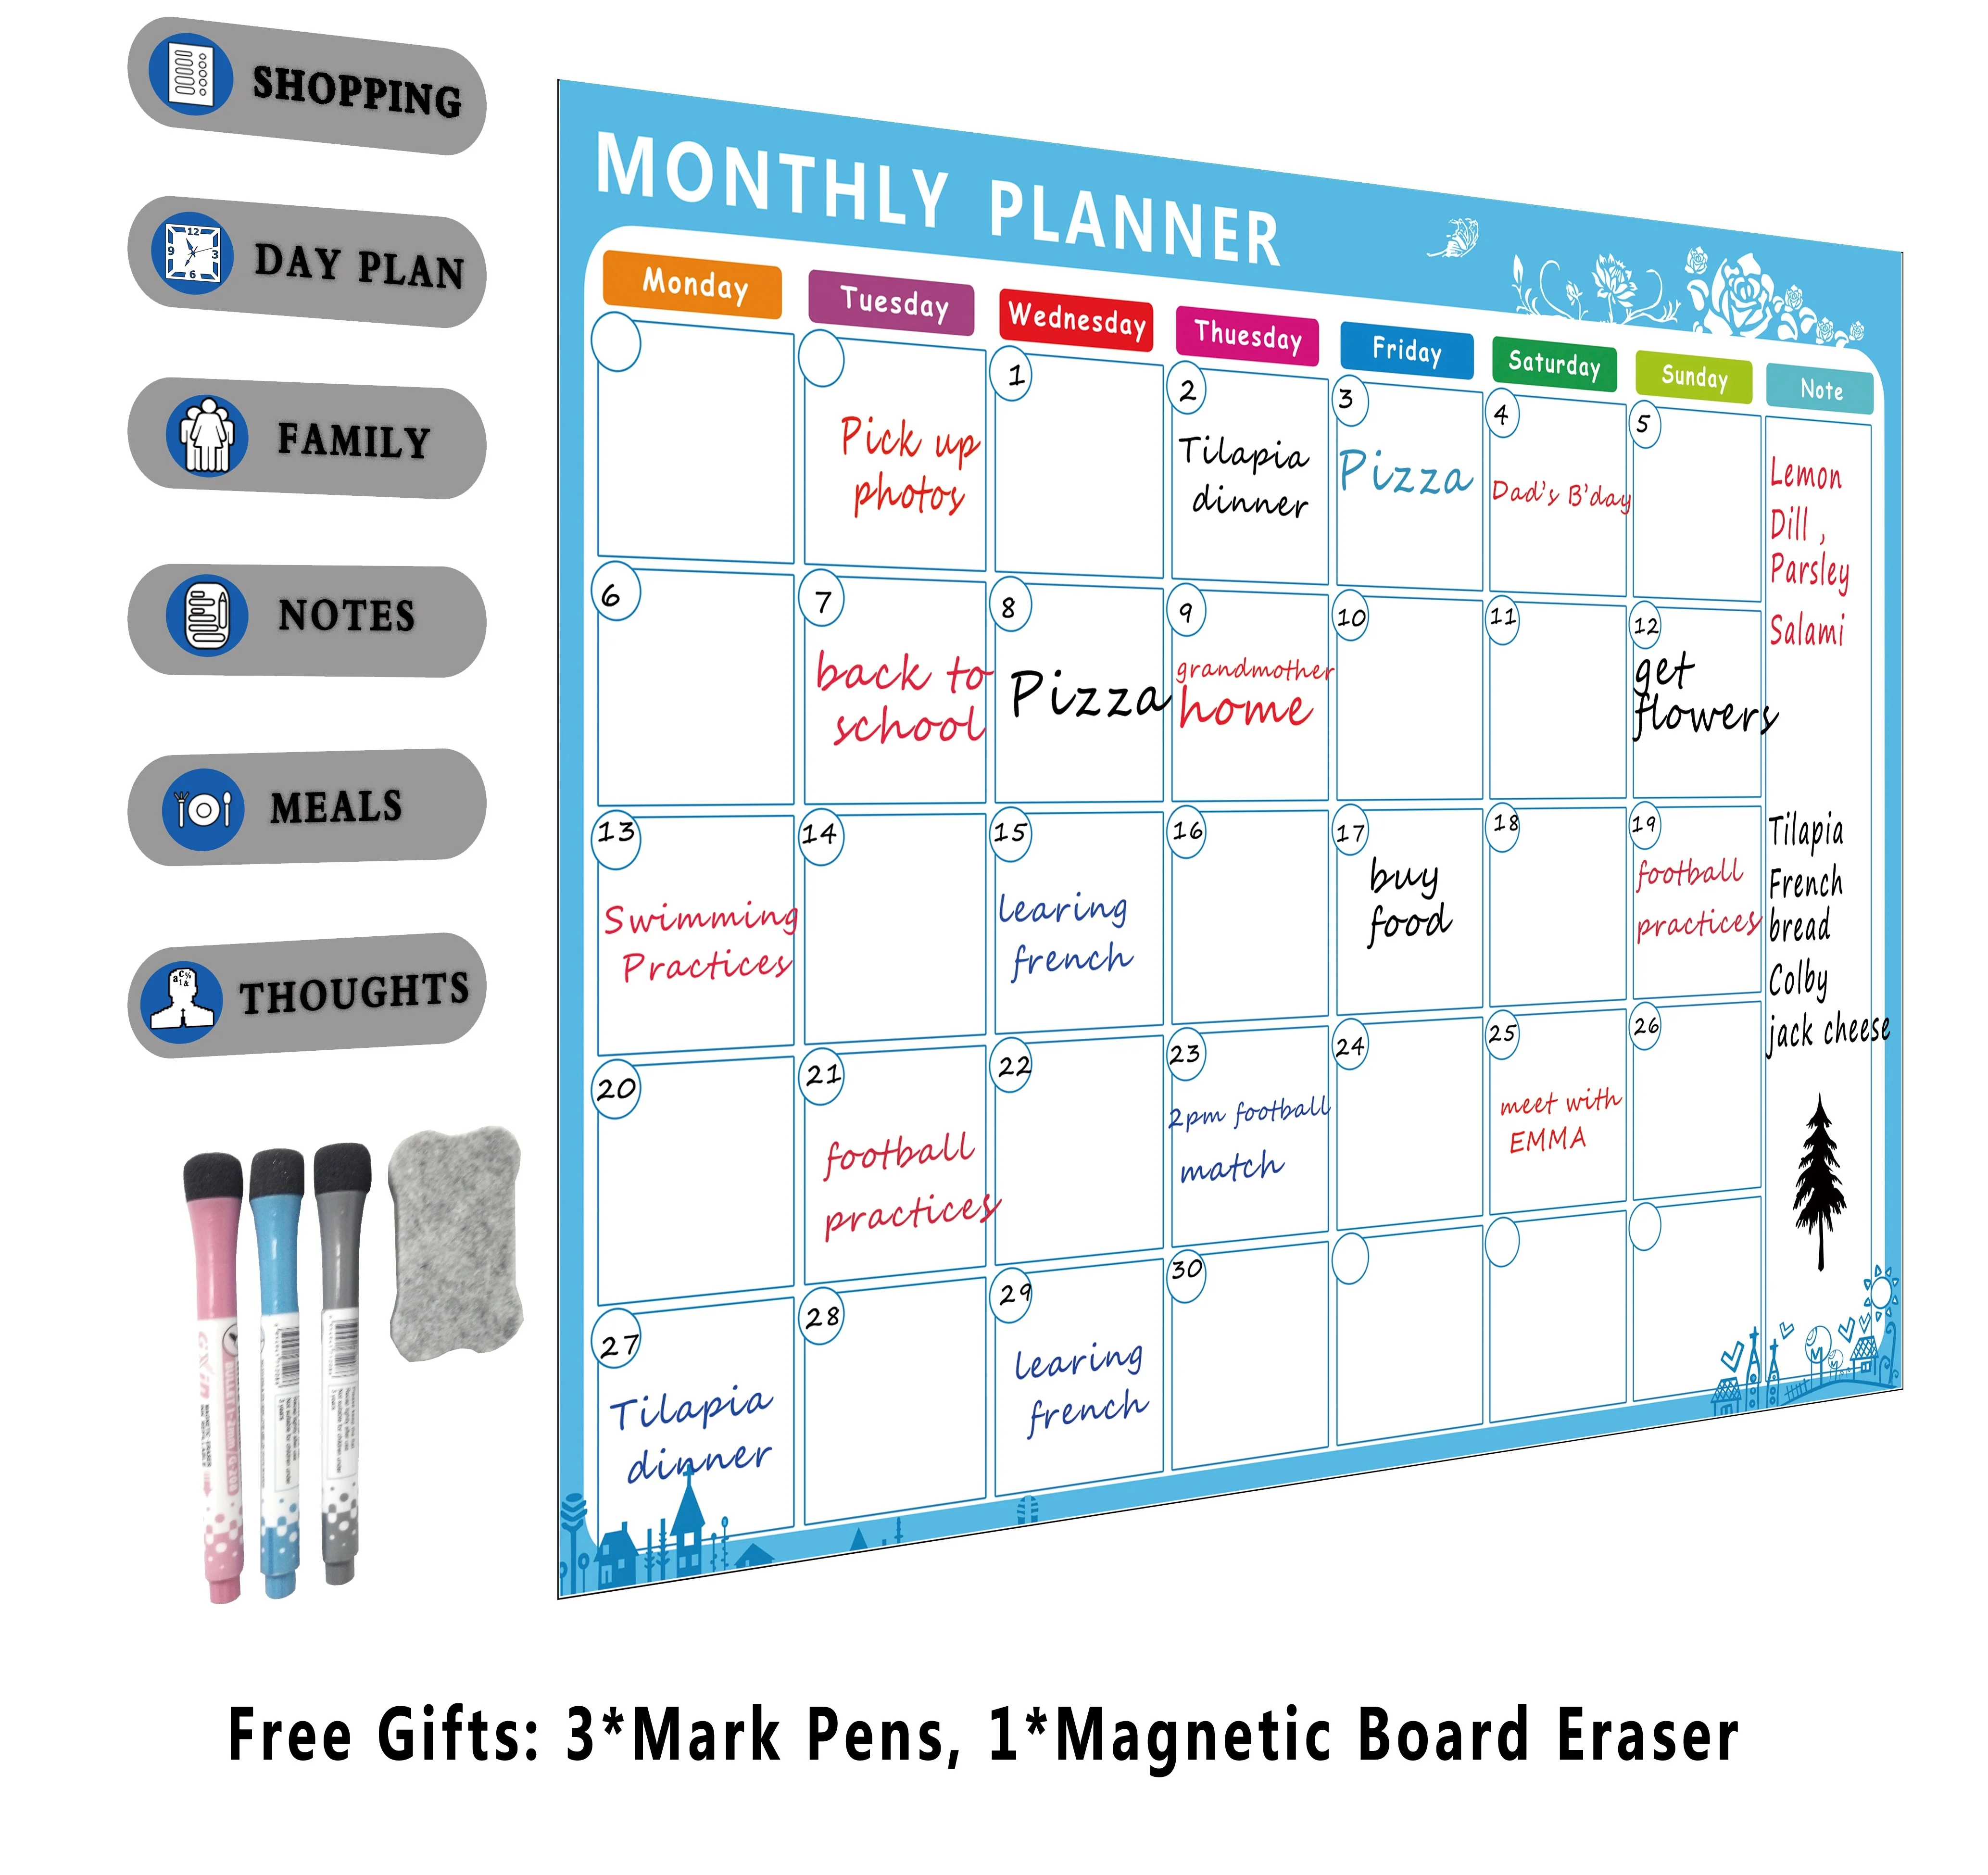 A5 Petite Planner Weekly Family Office Schedule Reminder Magnet Whiteboard 2pens 